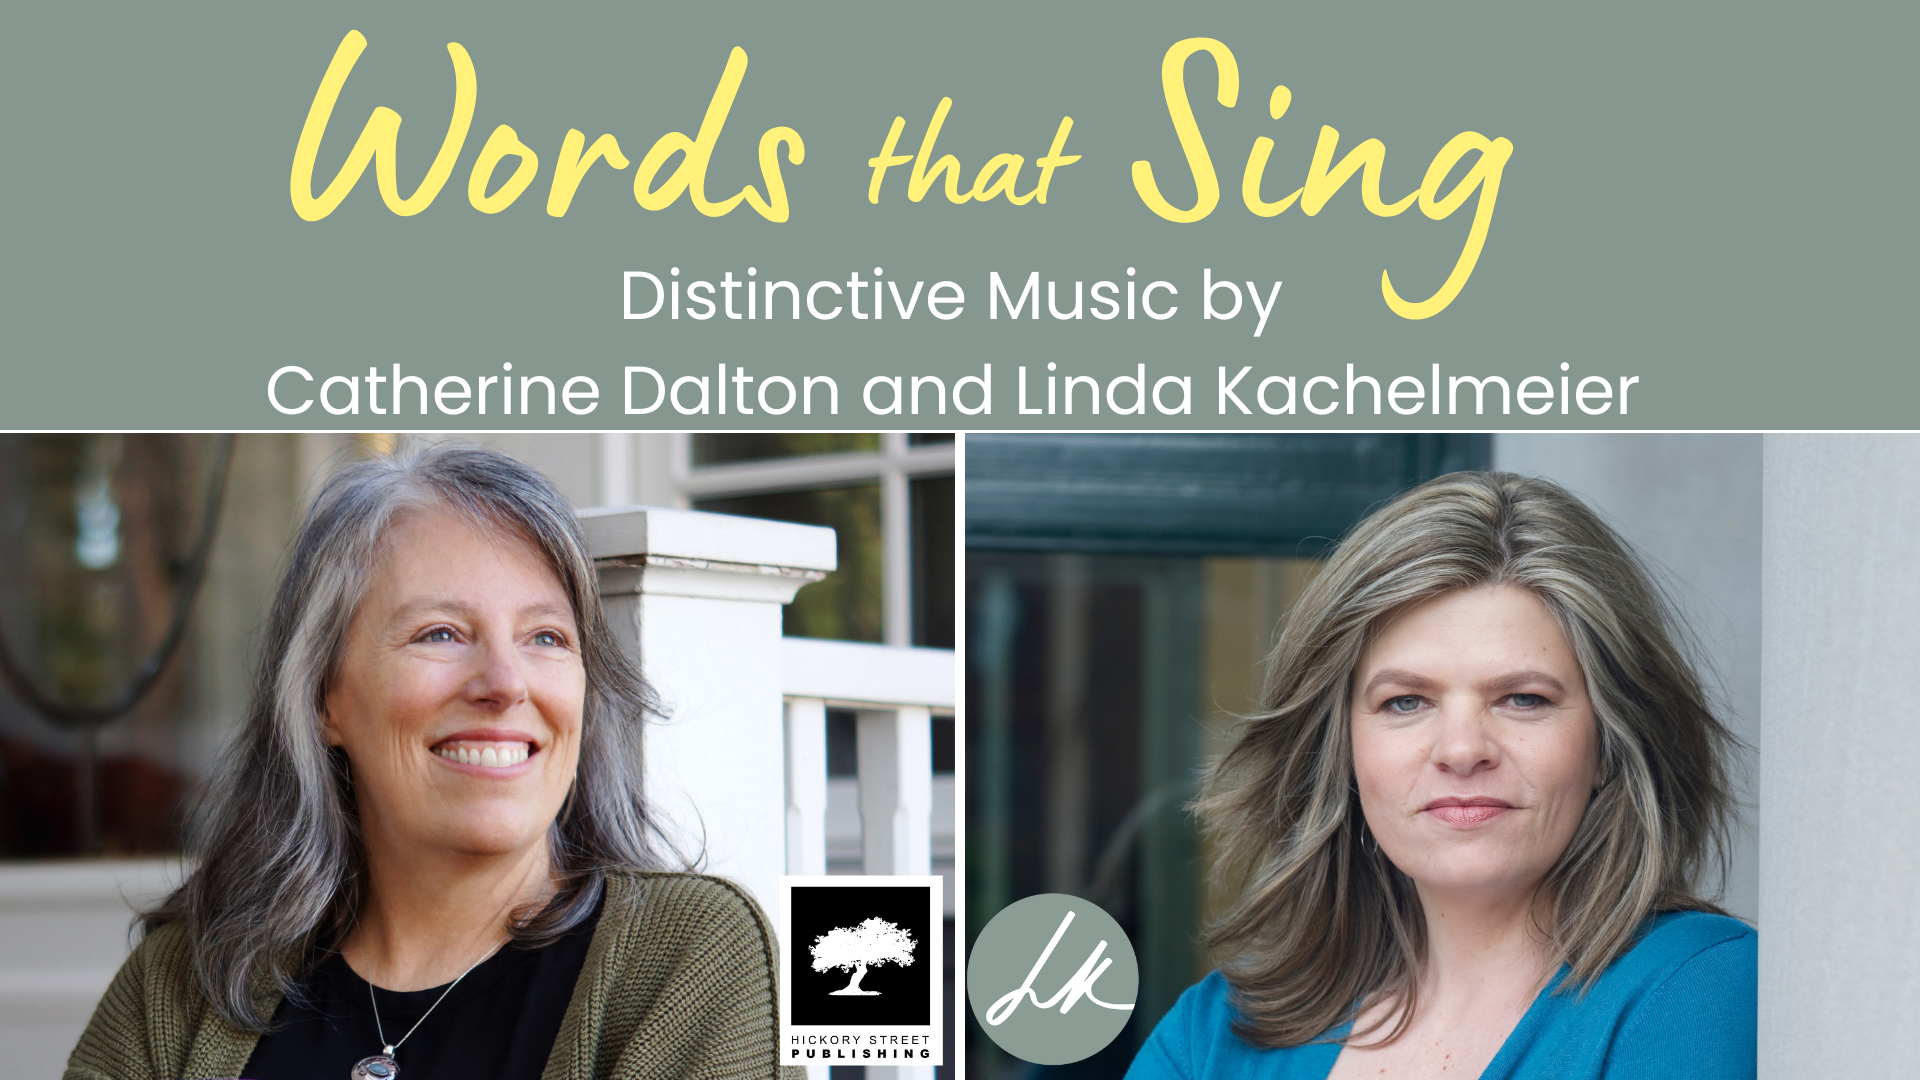 Join me at the American Choral Director’s Conference for my showcase: Words that Sing